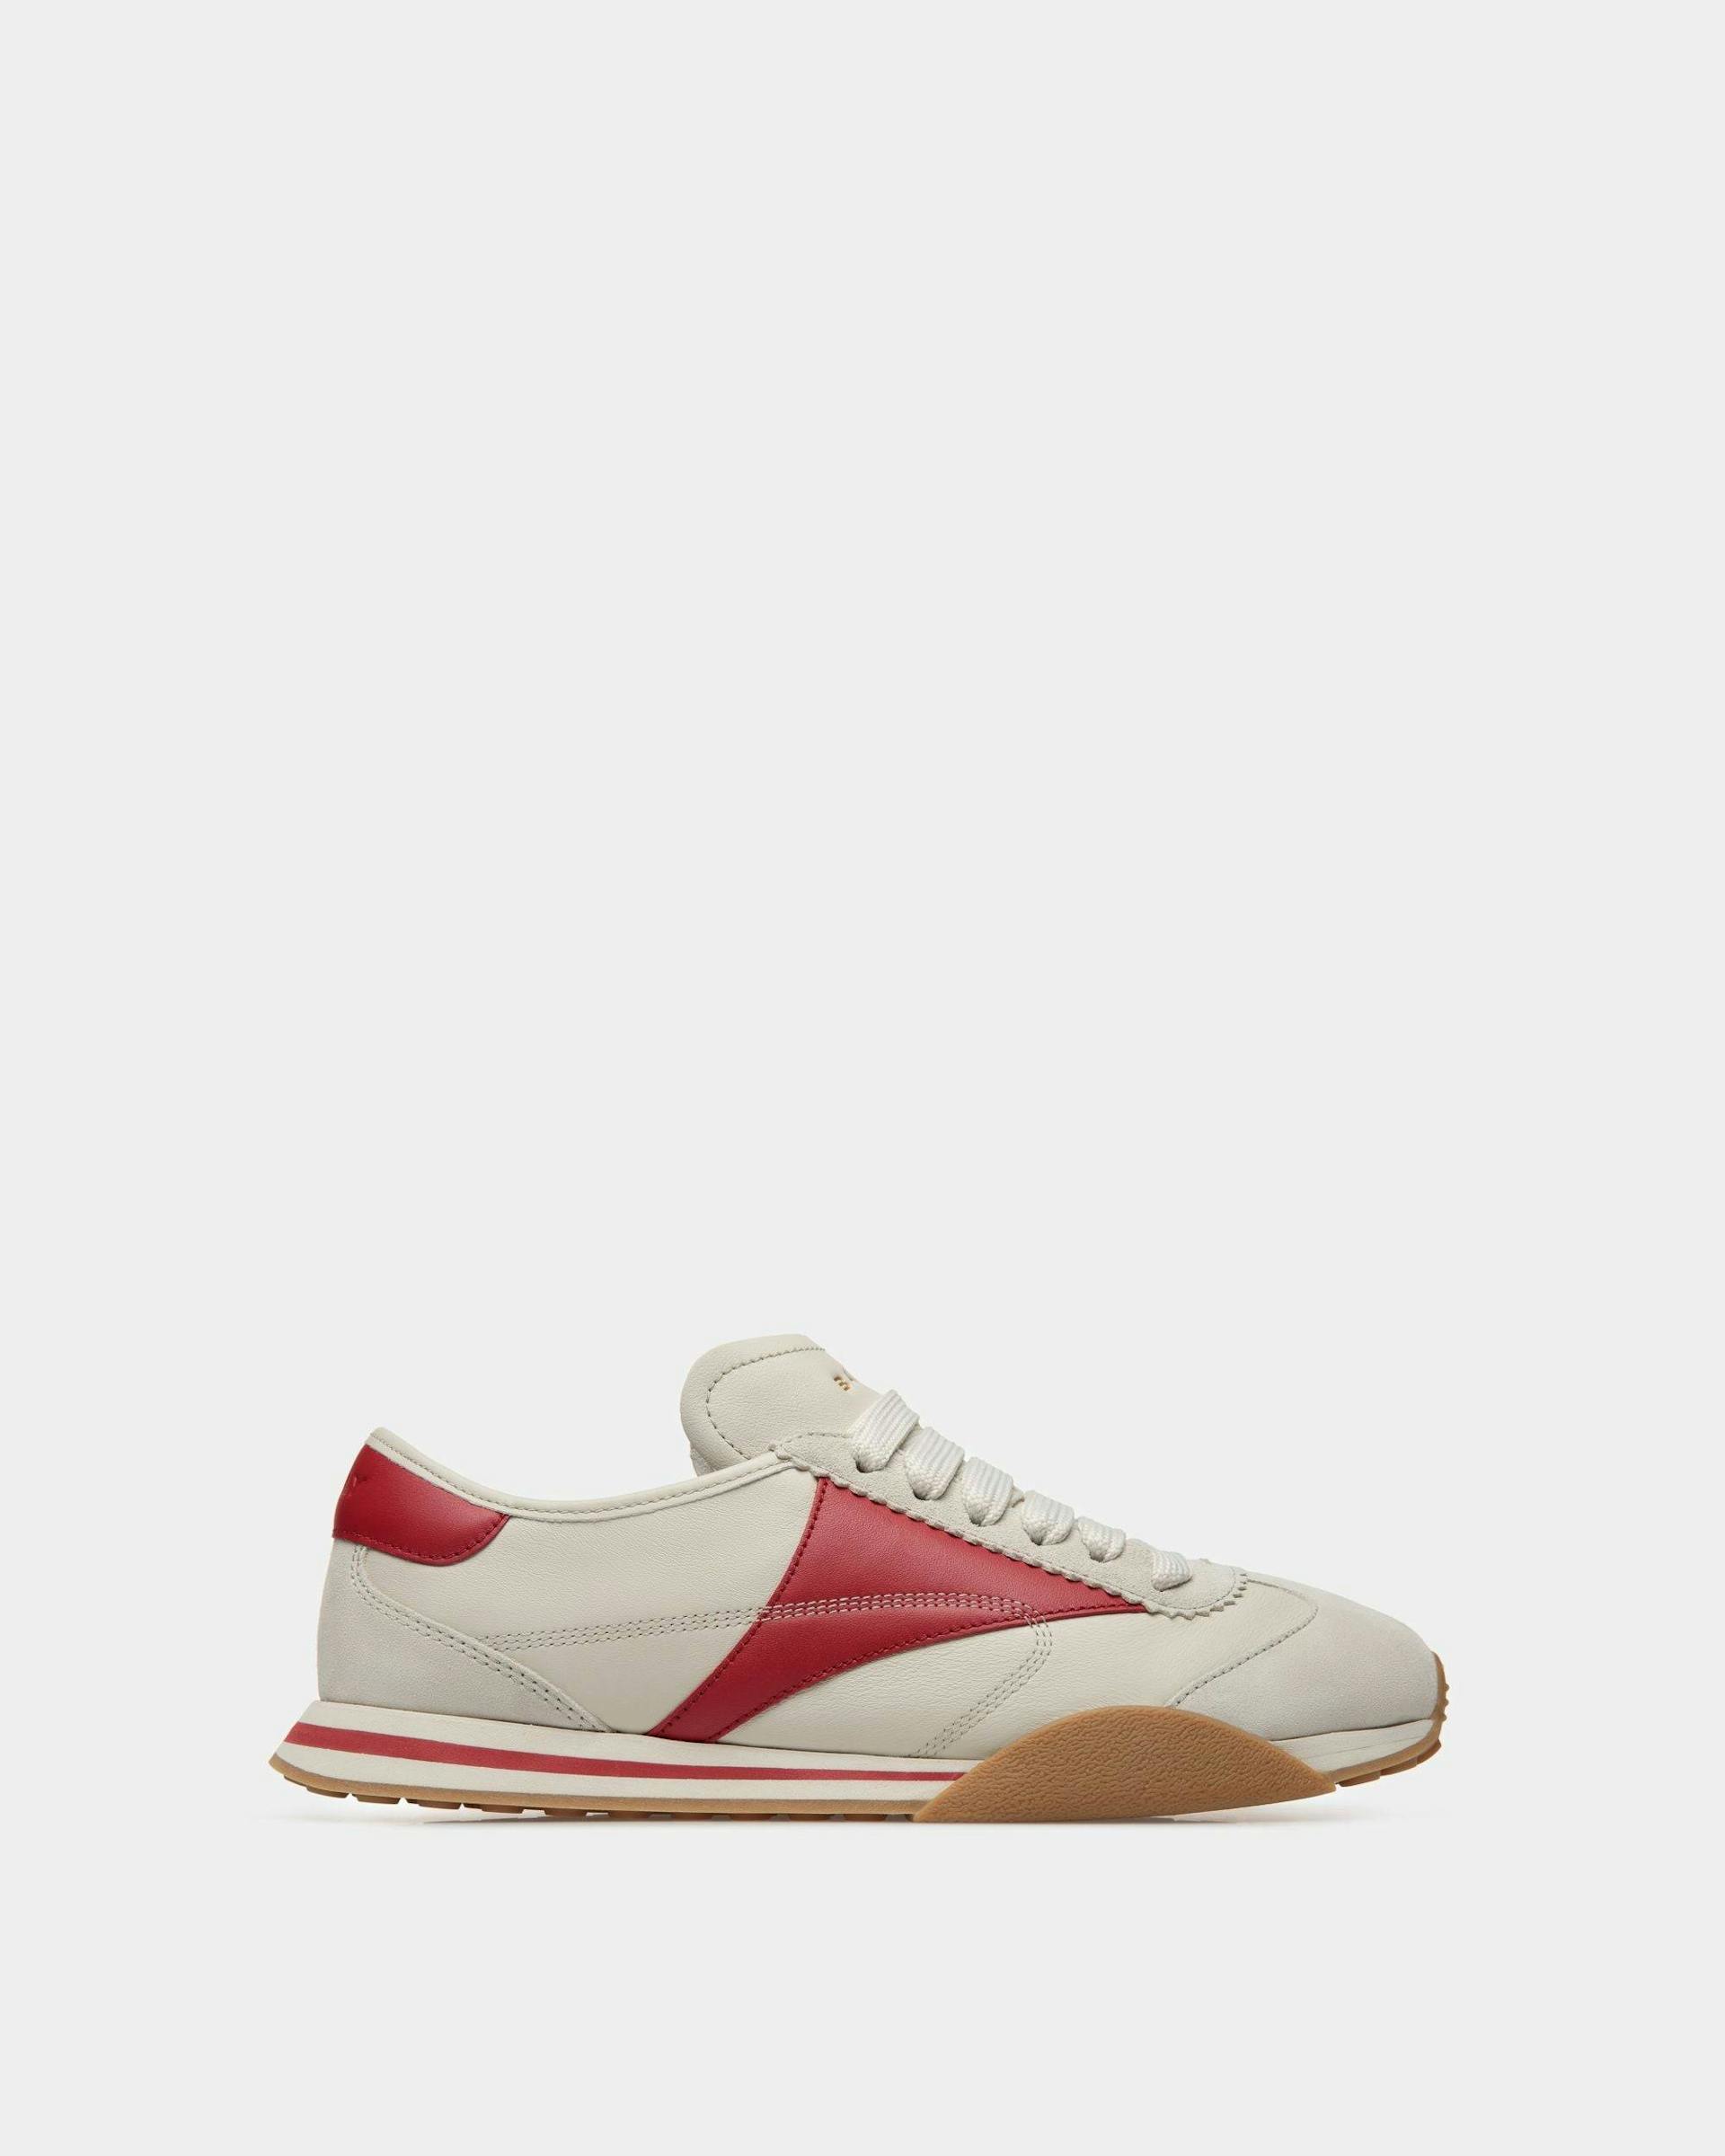 Sussex Sneakers - Bally